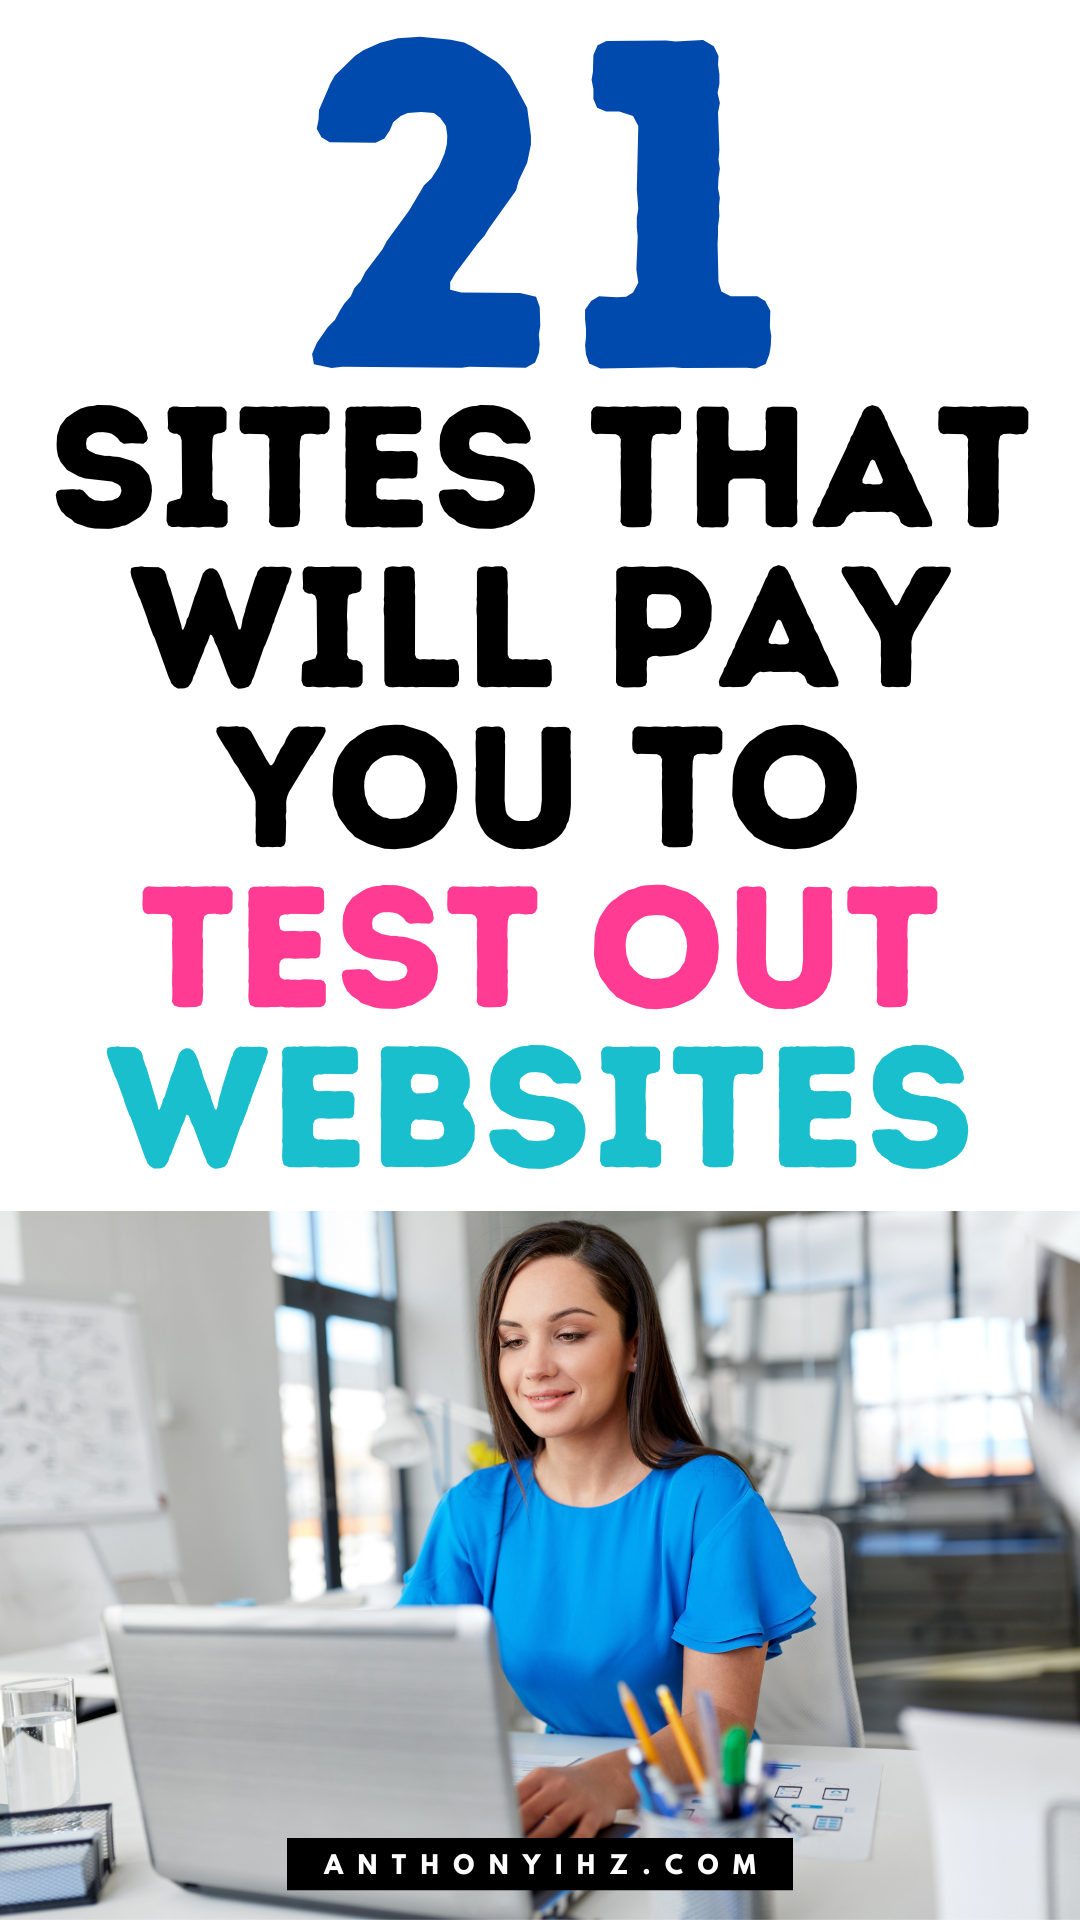 get paid to test websites and apps